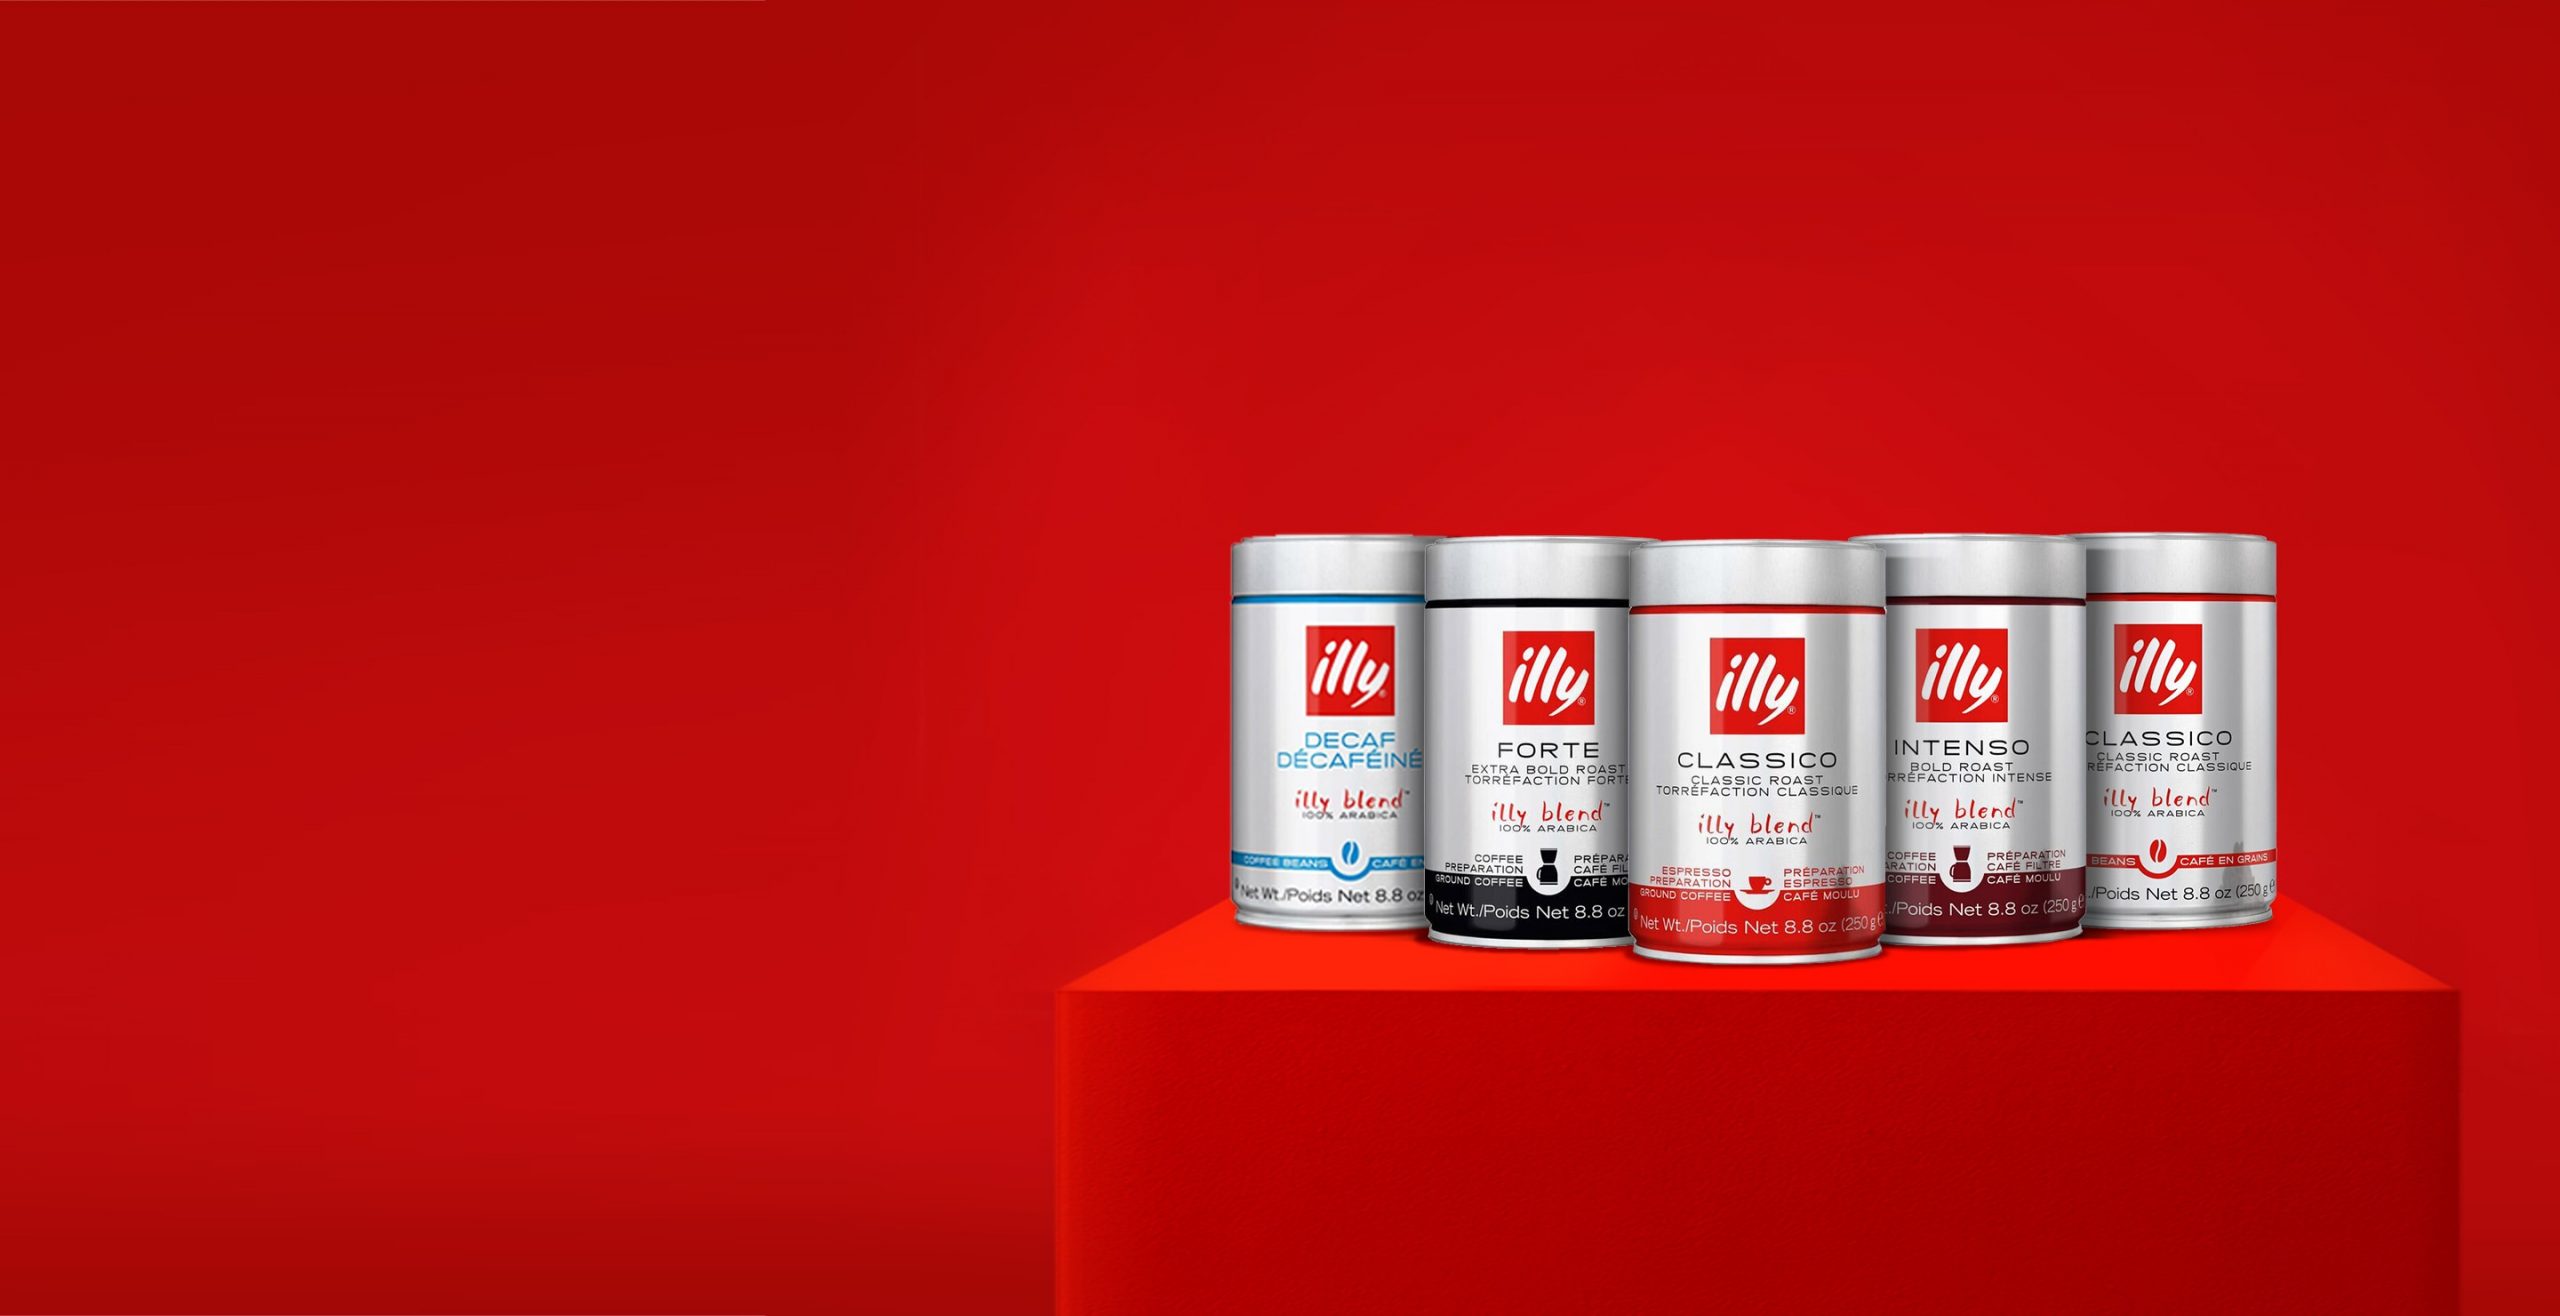 illy products